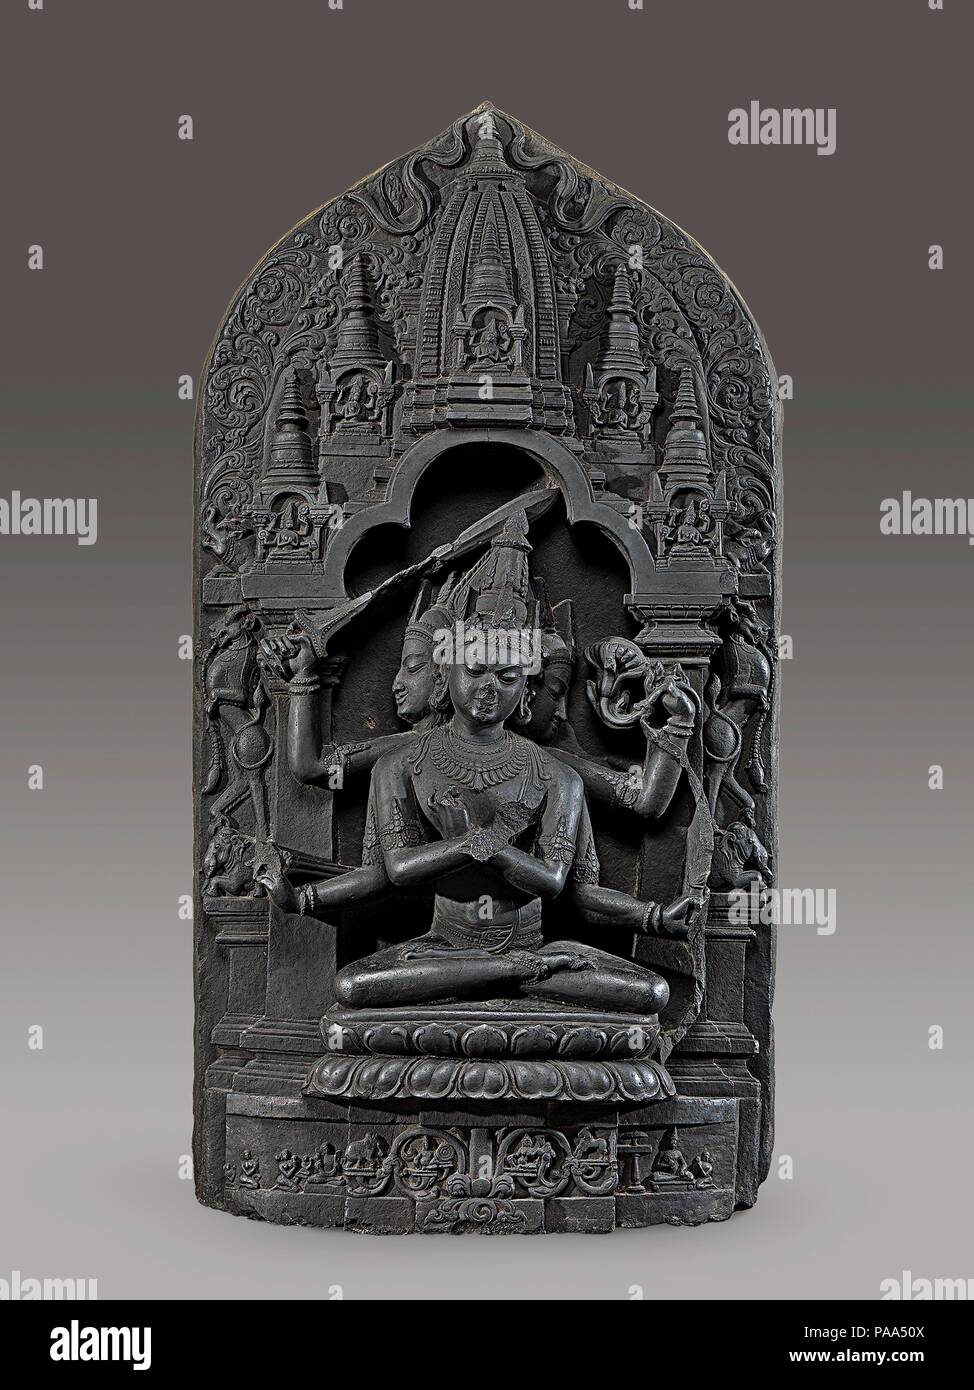 Manjuvajra Mandala. Culture: Bangladesh or India (Bengal). Dimensions: H. 46 in. (116.8 cm); W. 24 in. (61 cm); D. 7 1/2 in. (19.1 cm). Date: 11th century.  This sculpture represents an esoteric form of Manjushri, the Bodhisattva of Transcendent Wisdom. He has three heads and six arms; four hold a bow and arrow, a sword, and a lotus, while the remaining two hold vajras (thunderbolt scepters) and are crossed at the chest in an esoteric gesture (mudra) identifying supreme wisdom. Most prominent among this array of weapons is the sword, which cuts away ignorance and delusion. Leogryphs standing o Stock Photo